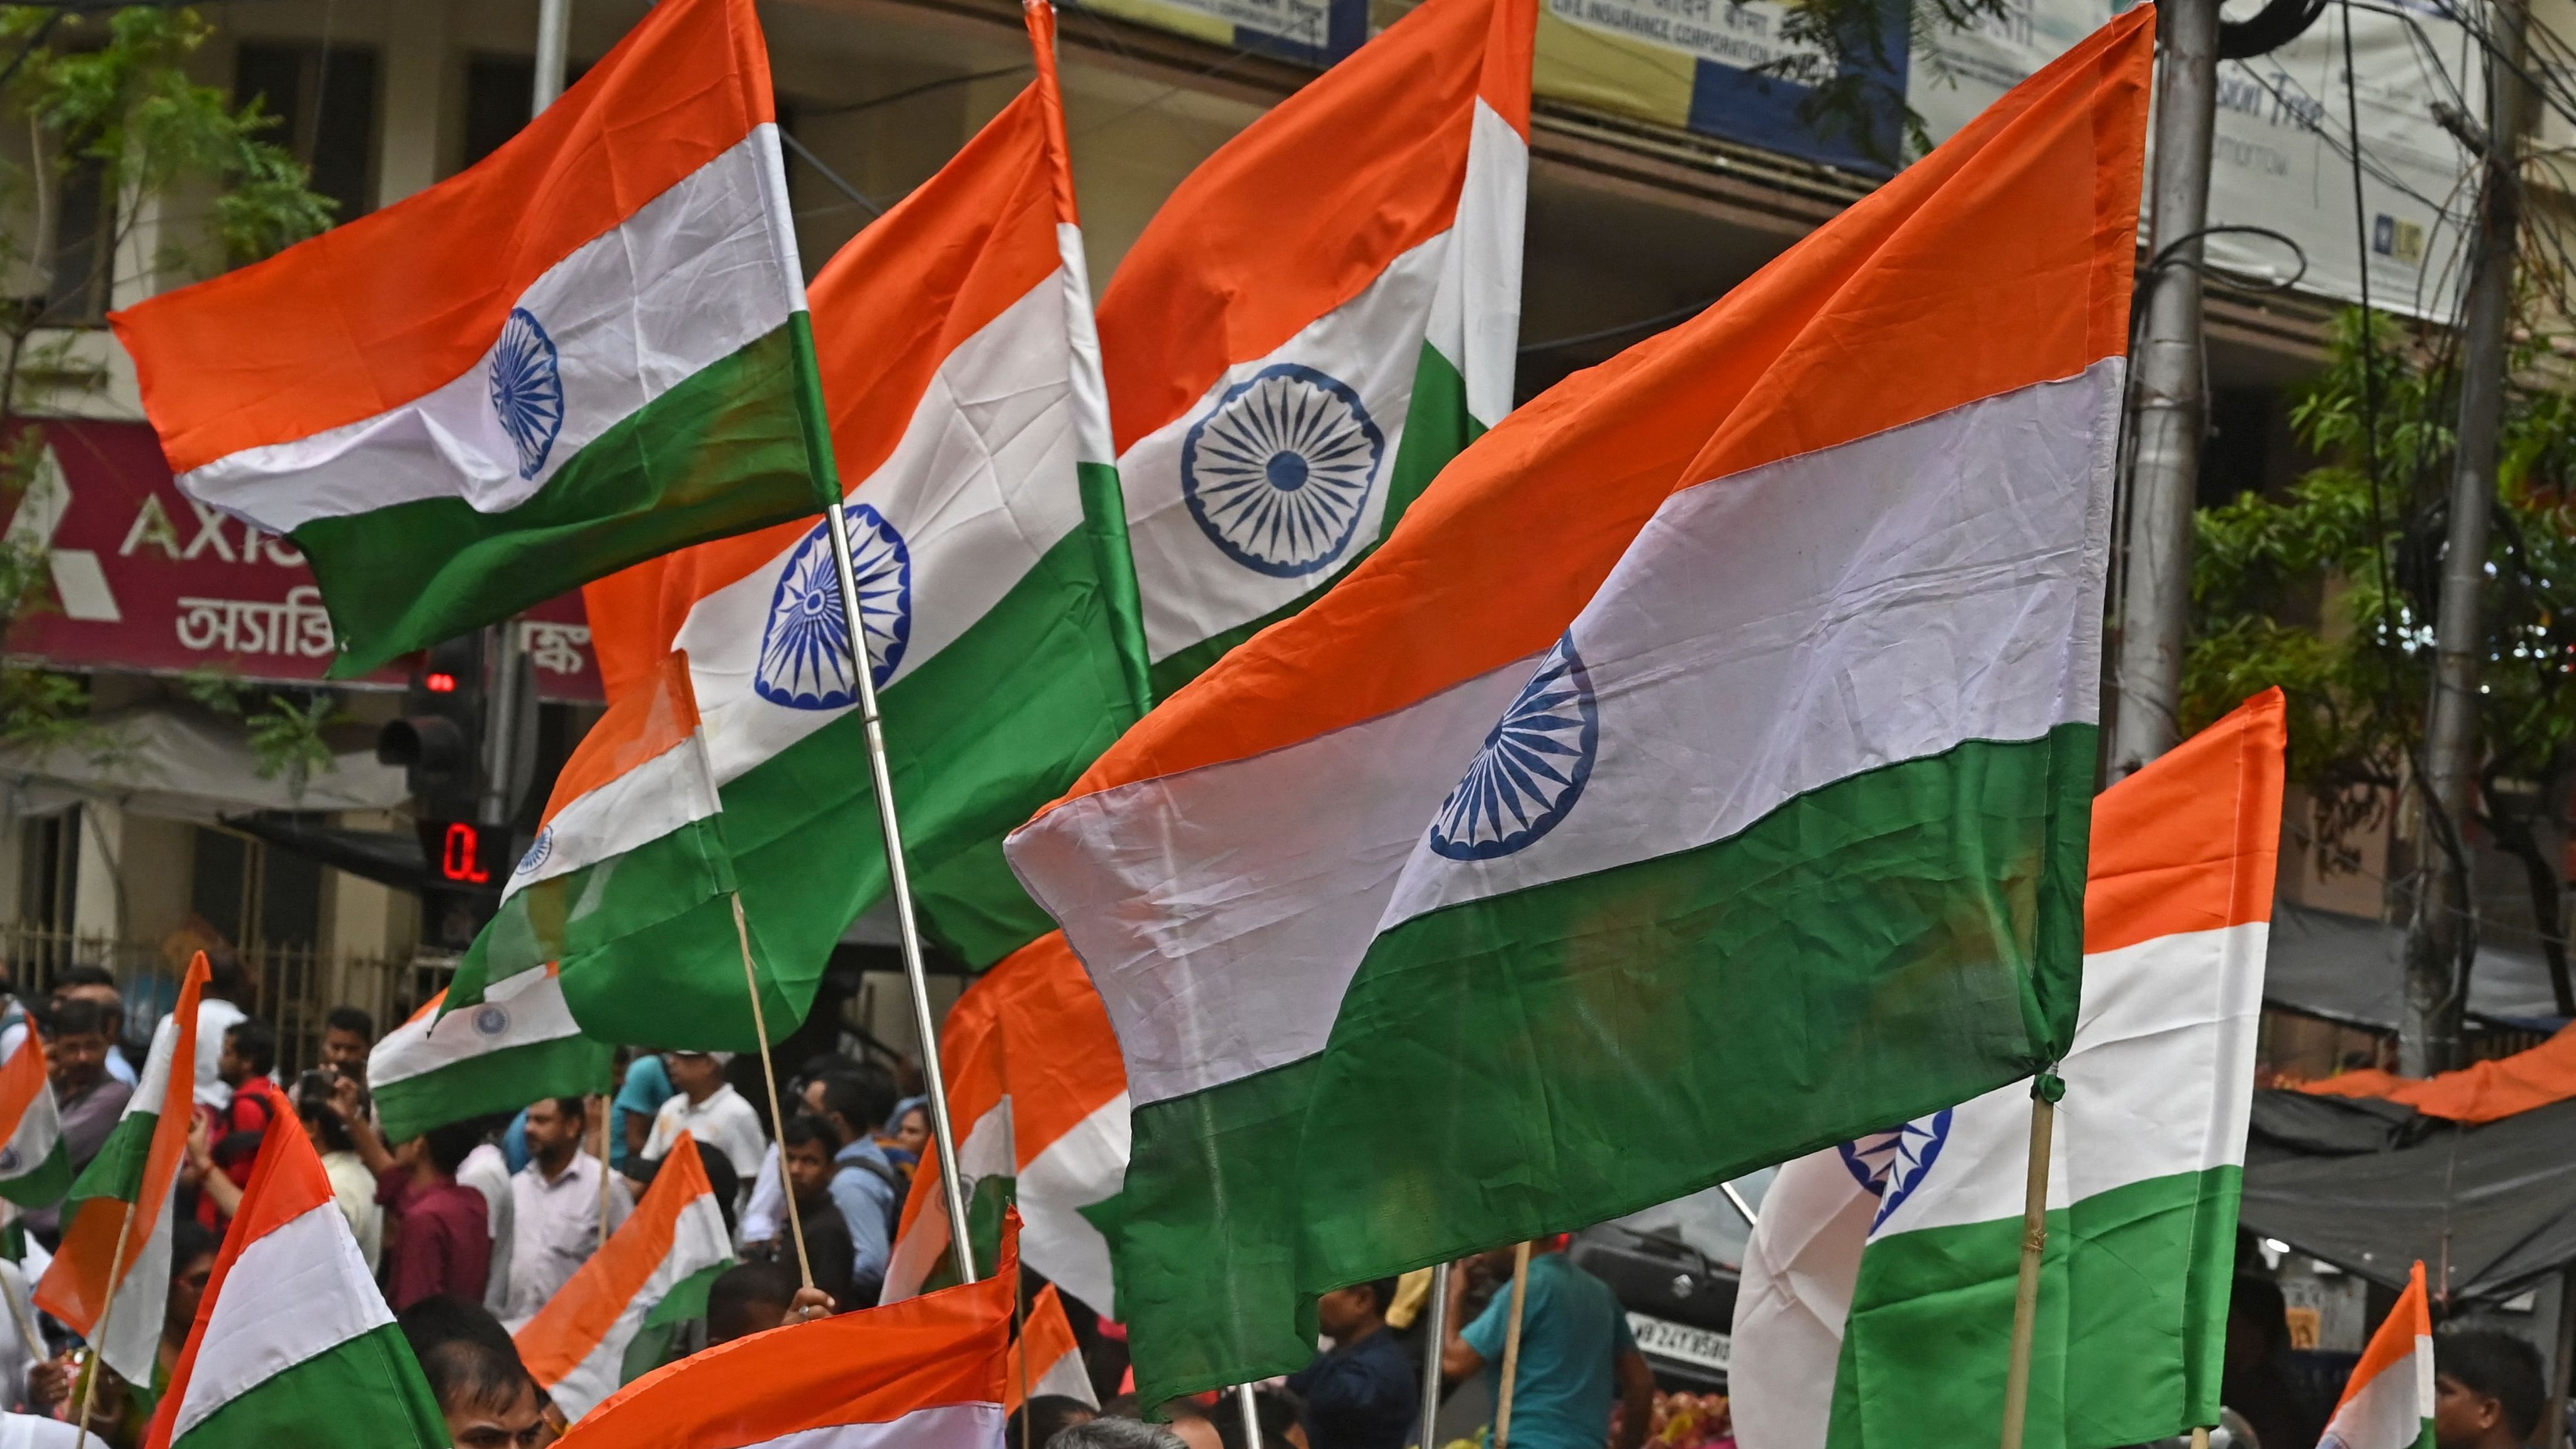 The flag, stripes of saffron, white and green stacked in that order with the Ashoka Chakra for a pendant, came from decades of evolution. Credit: AFP File Photo